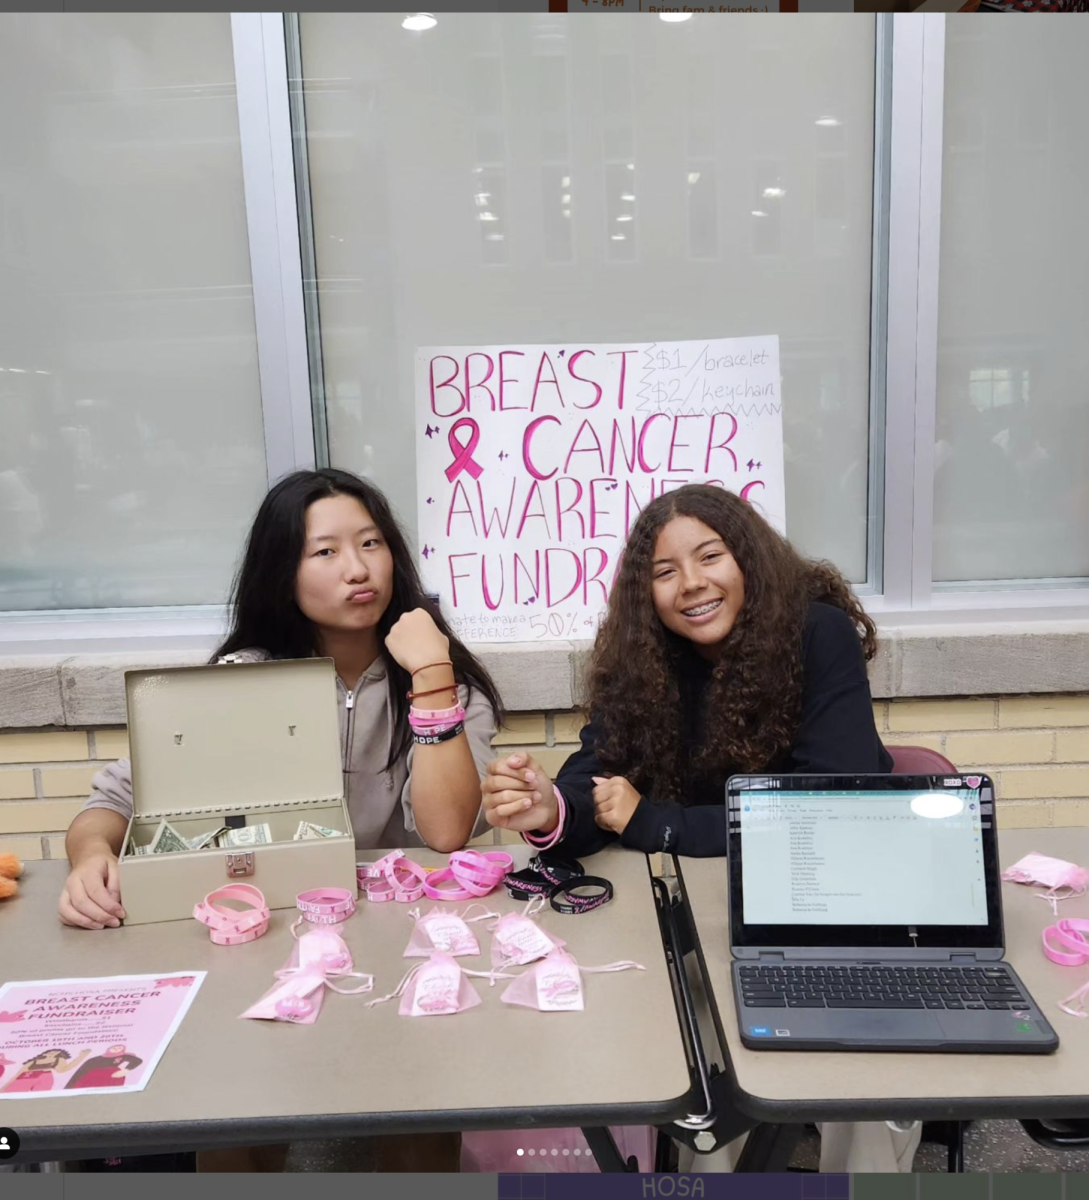 Sophomores+Amy+Yang+and+Claire+Cameron+fundraise+to+support+breast+cancer+awareness+during+a+lunch+period+on+Oct.+19+for+Health+Occupations+Students+of+America+%28HOSA%29.+